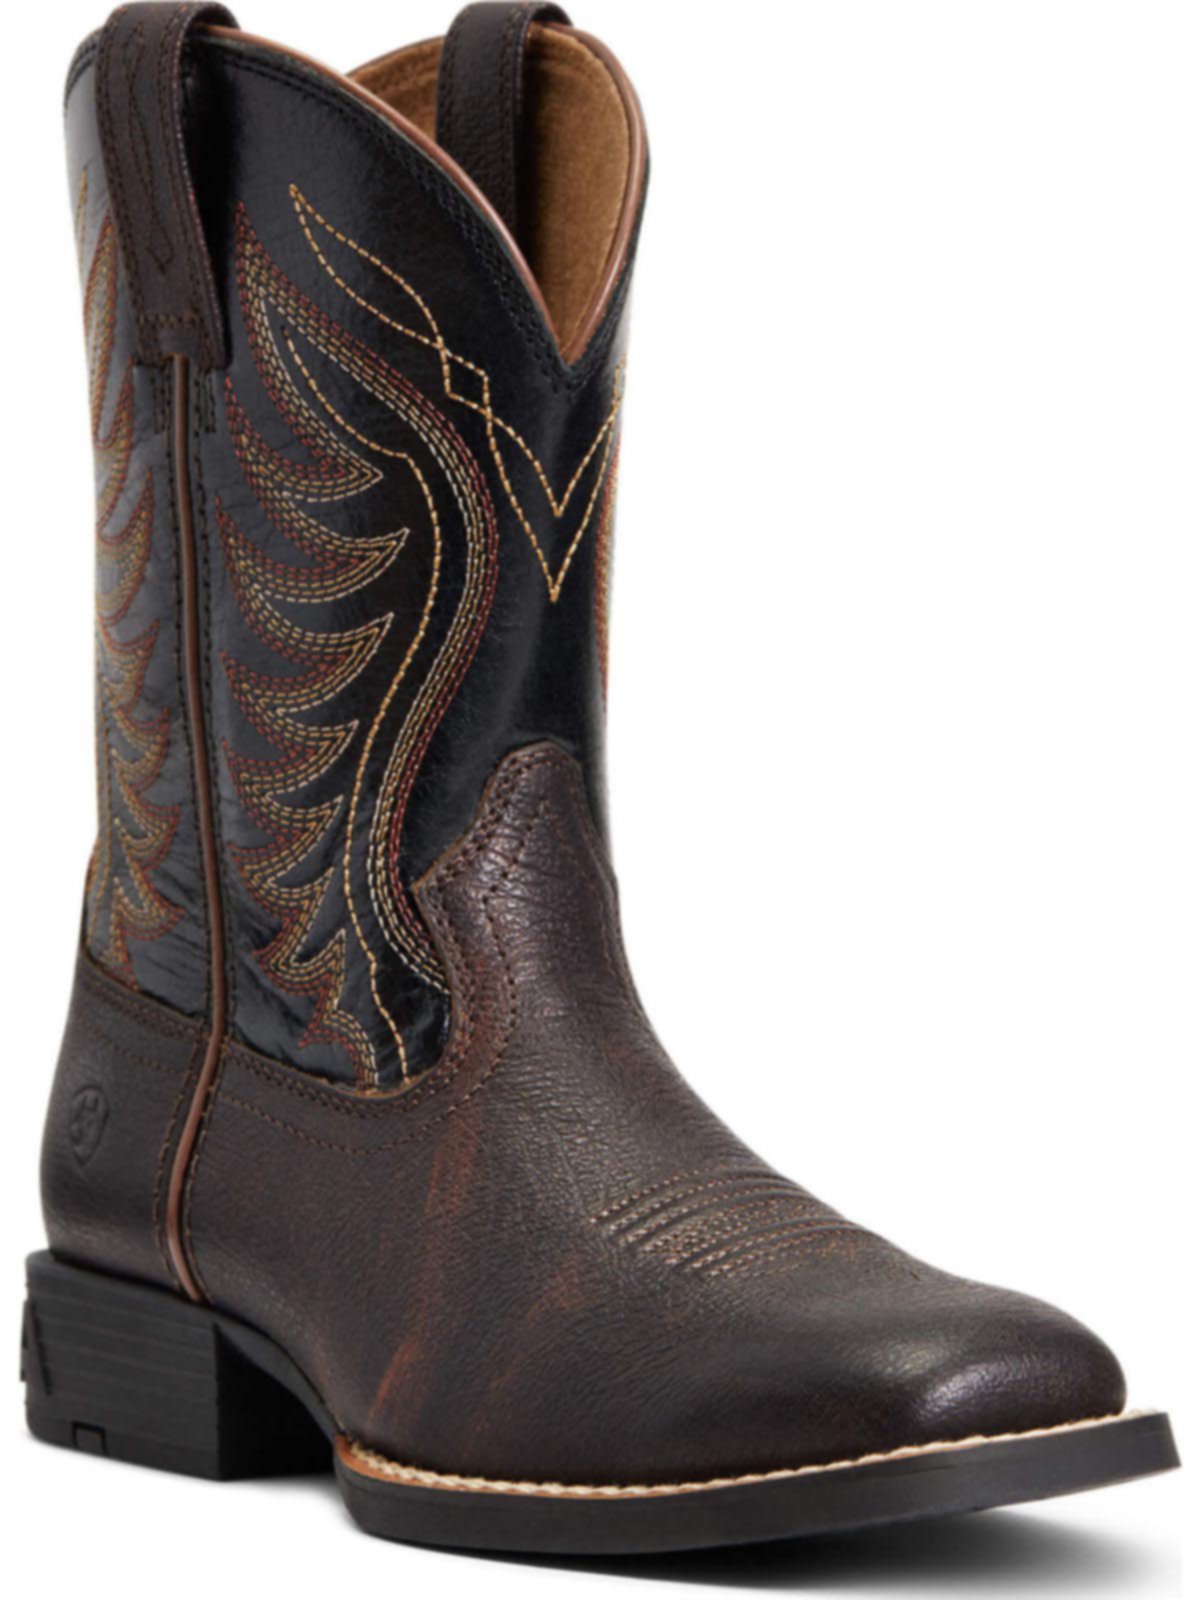 Shop Ariat Kids Amos Boot 10040333 | Save 20% + Free Shipping | BootAmerica